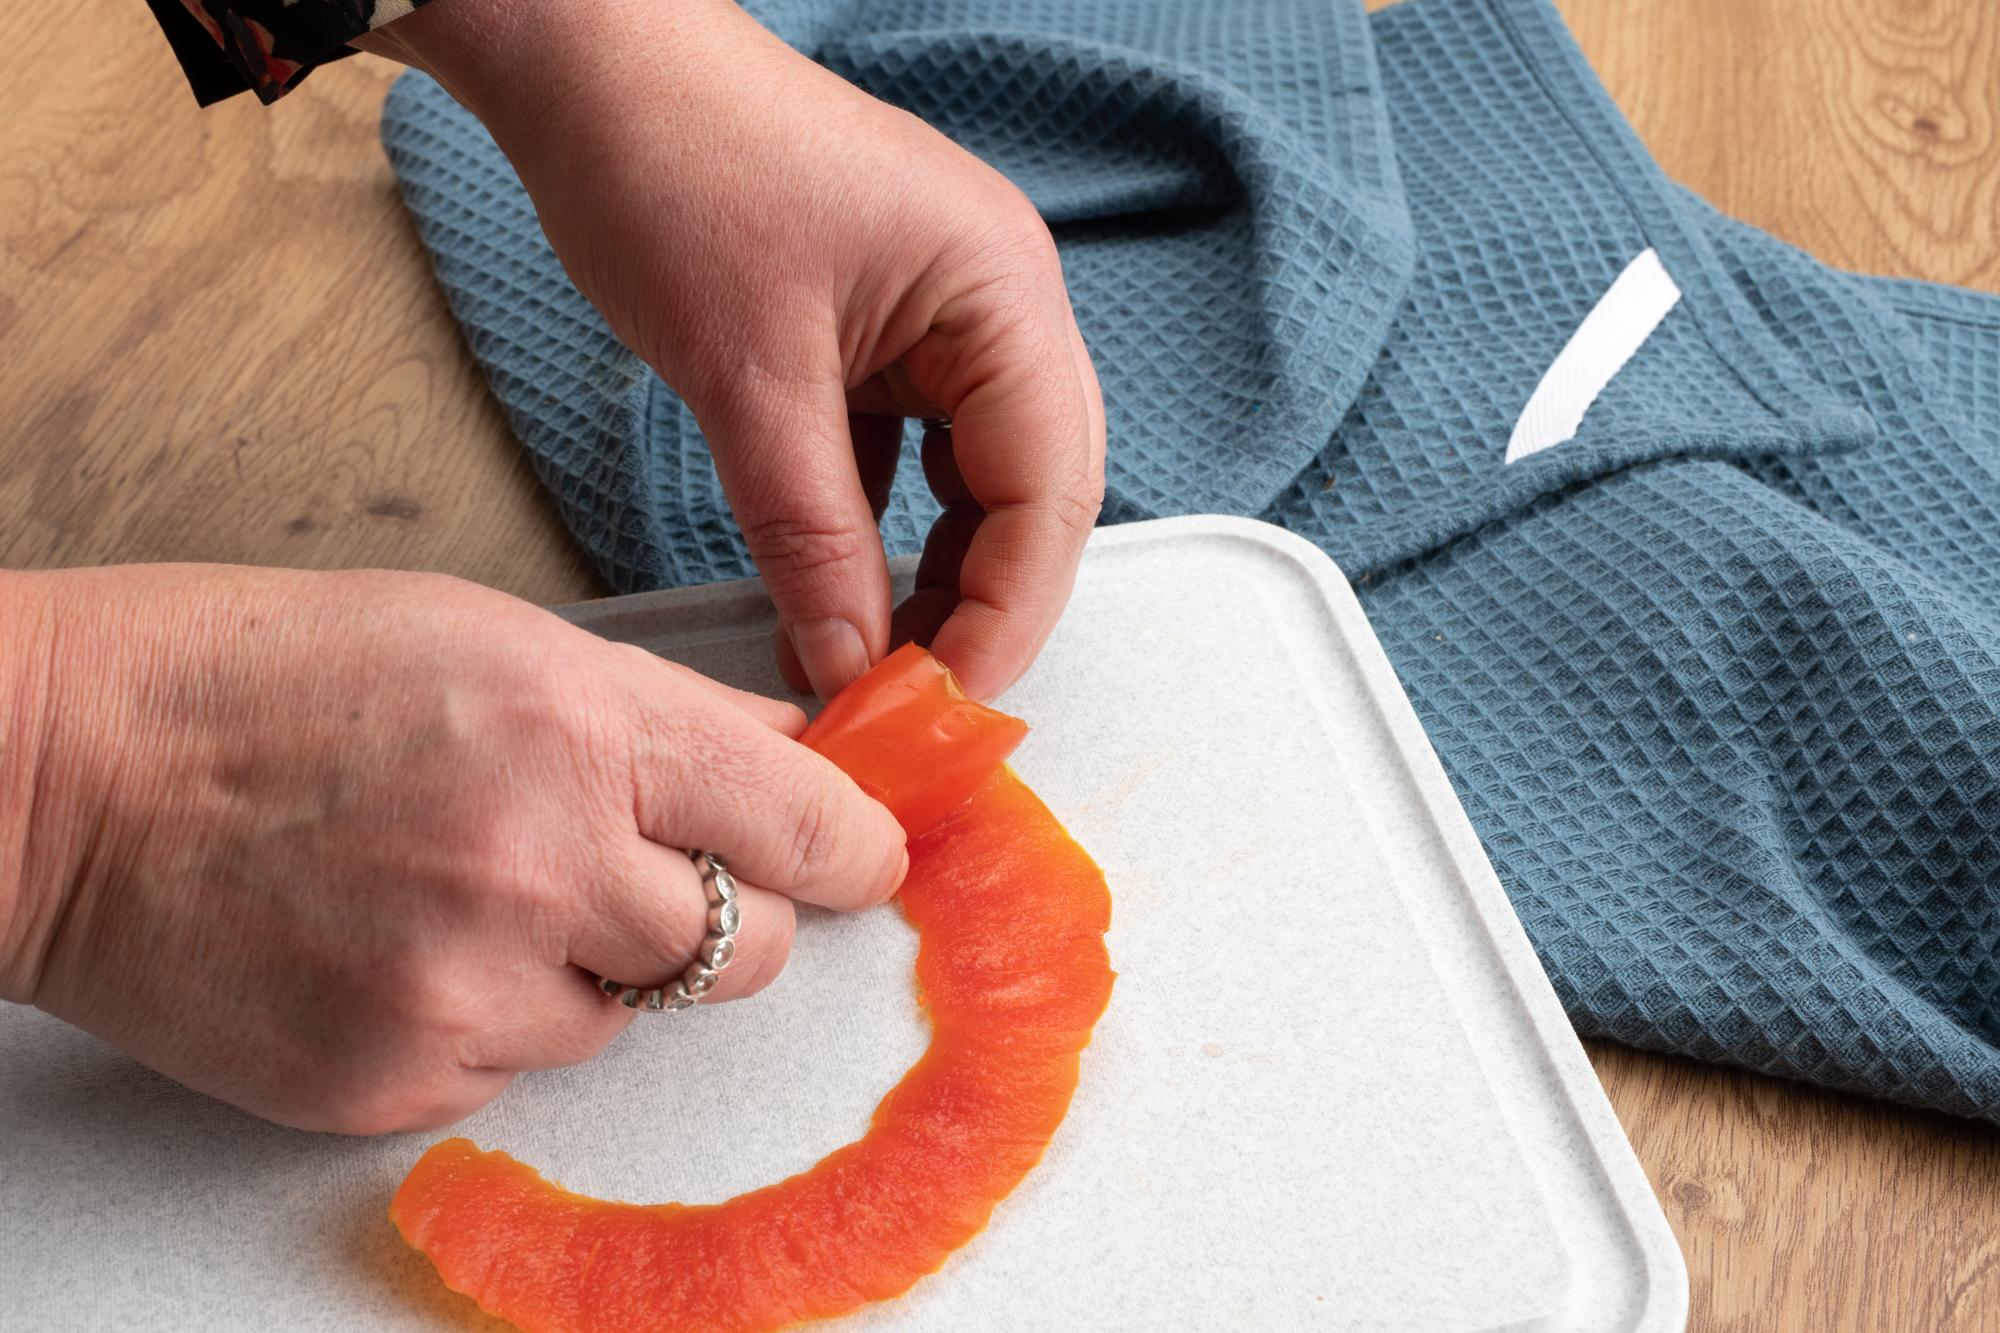 Rolling the tomato peel up into a rose shape.